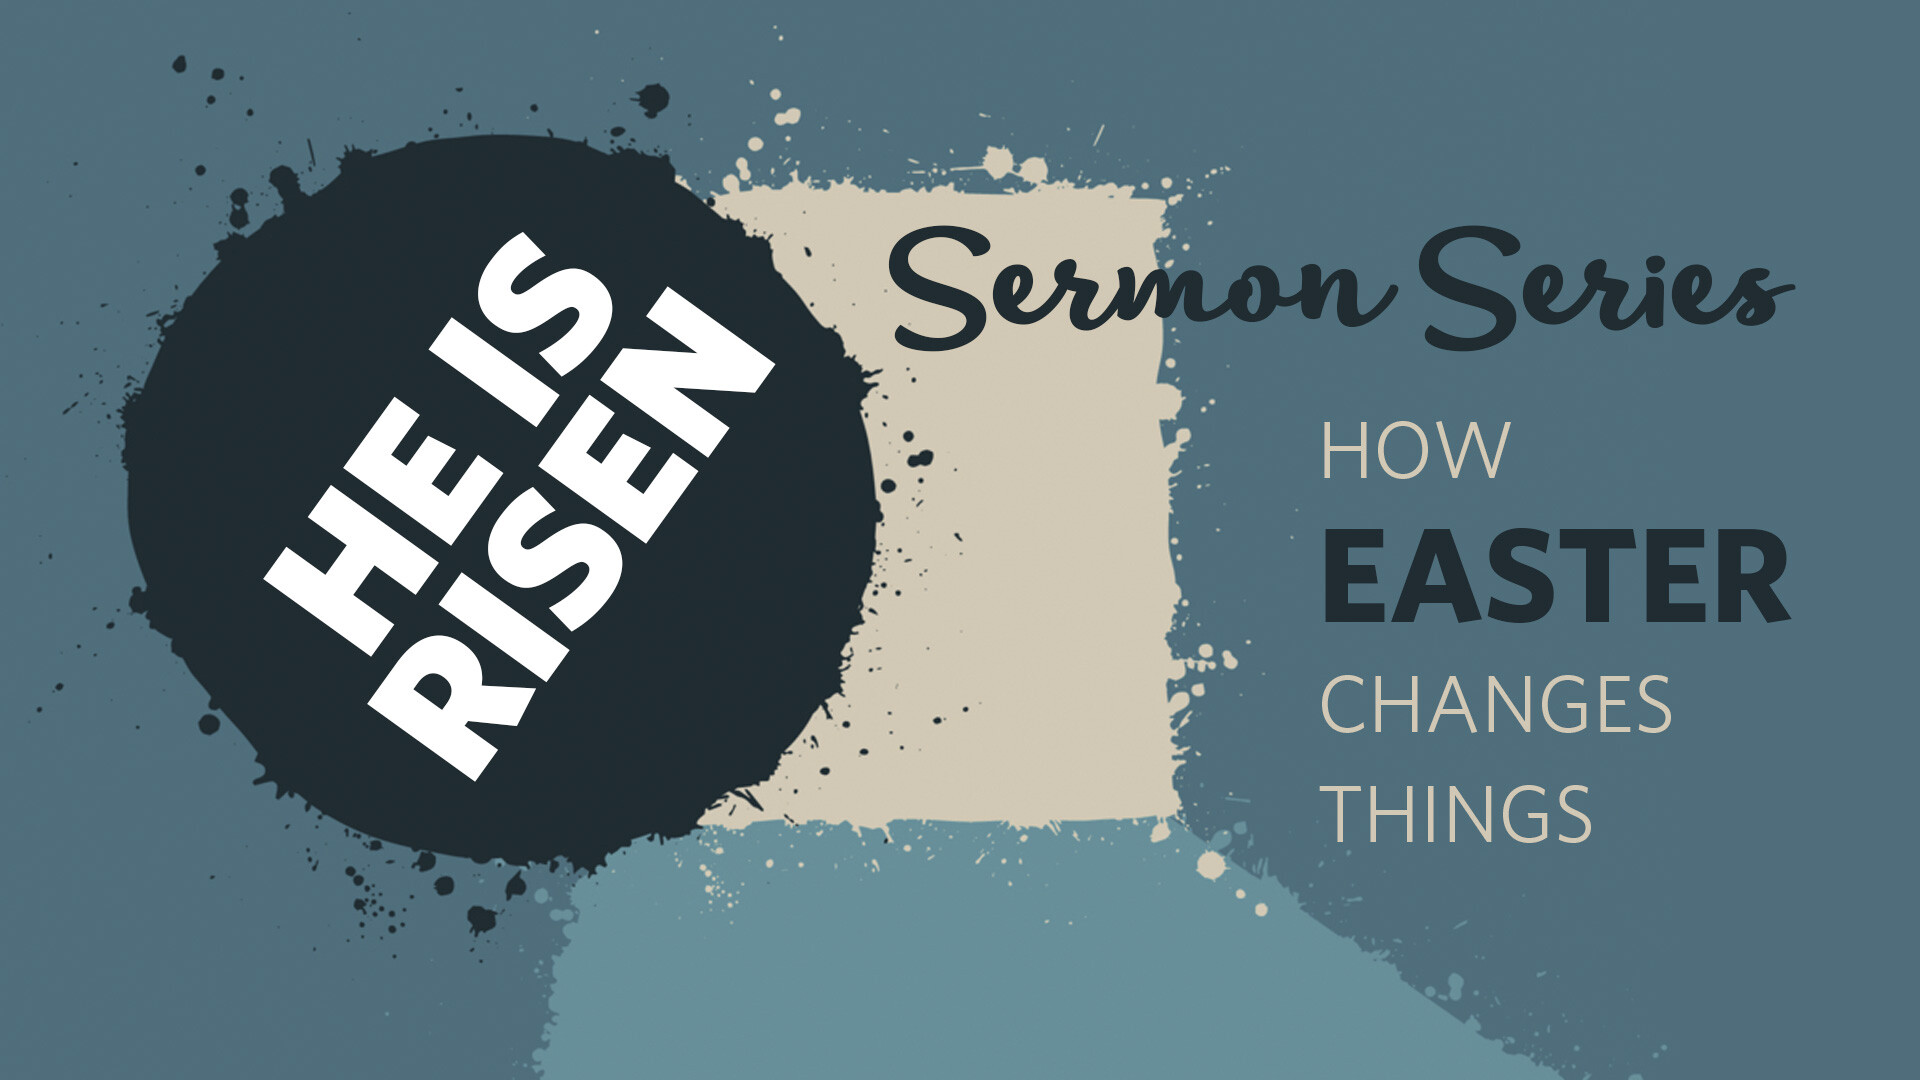 He is Risen - How Easter Changes Things